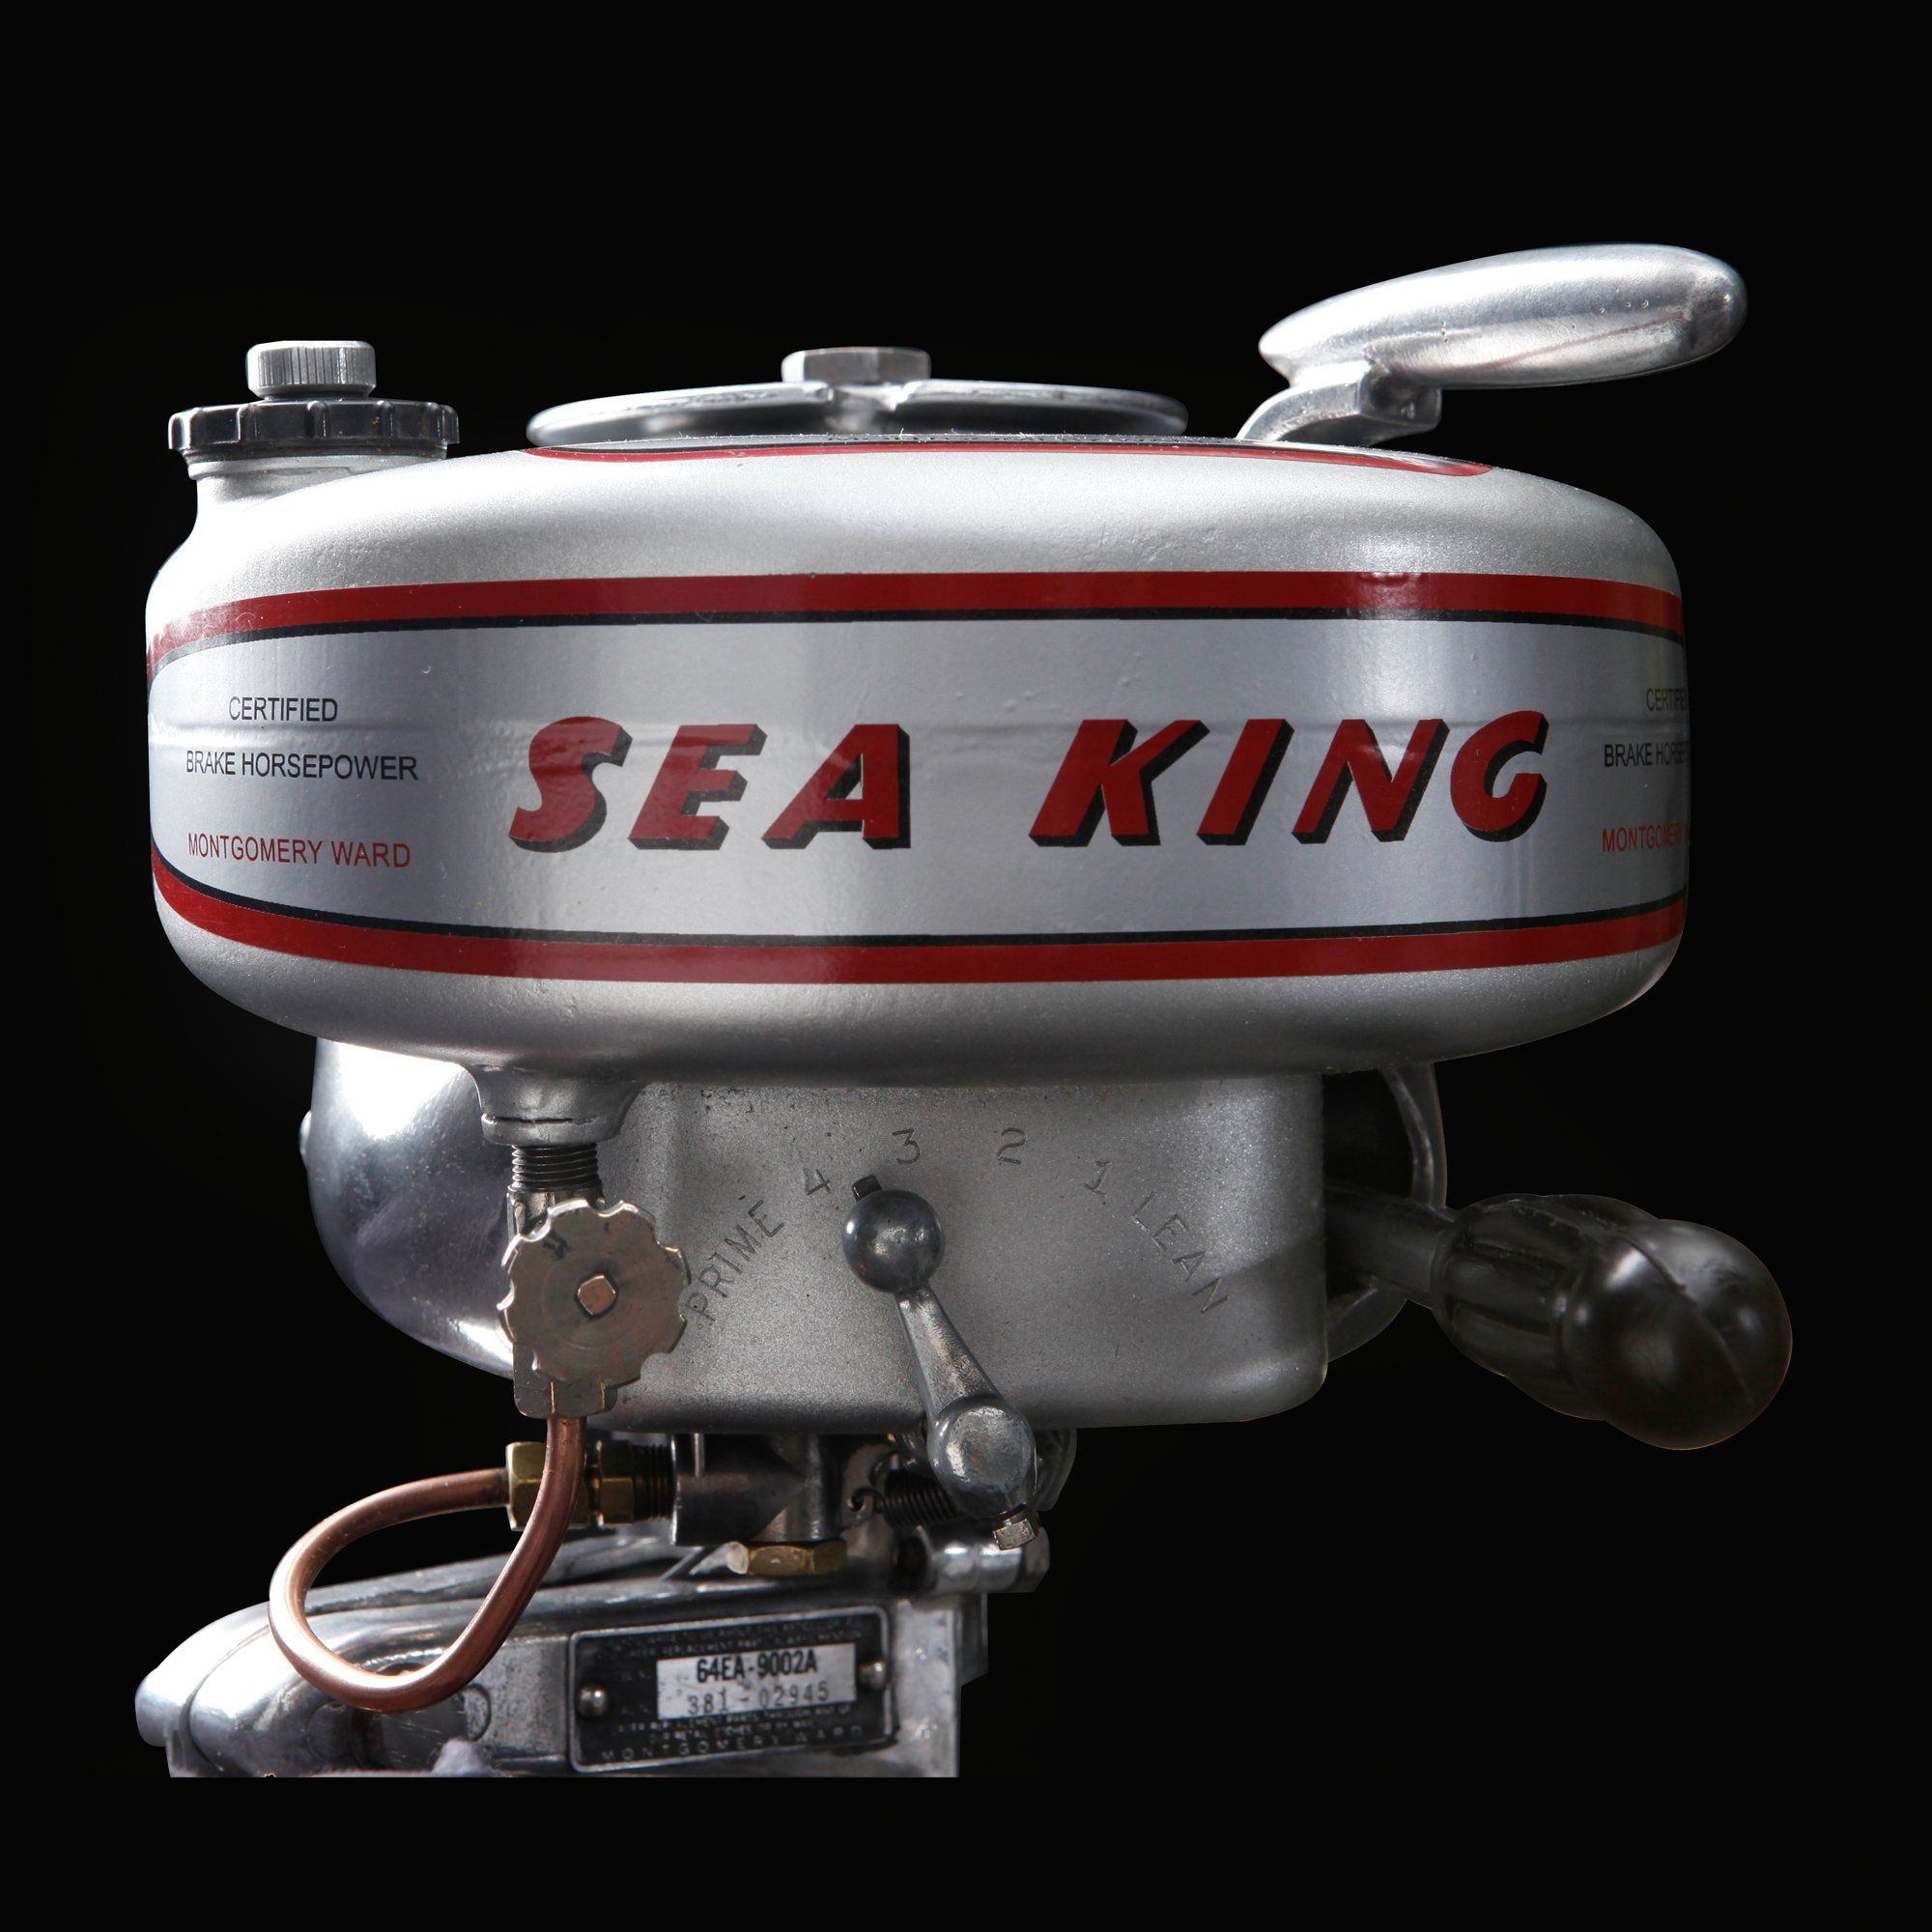 Noodle reccomend Johnson outboard powered midget